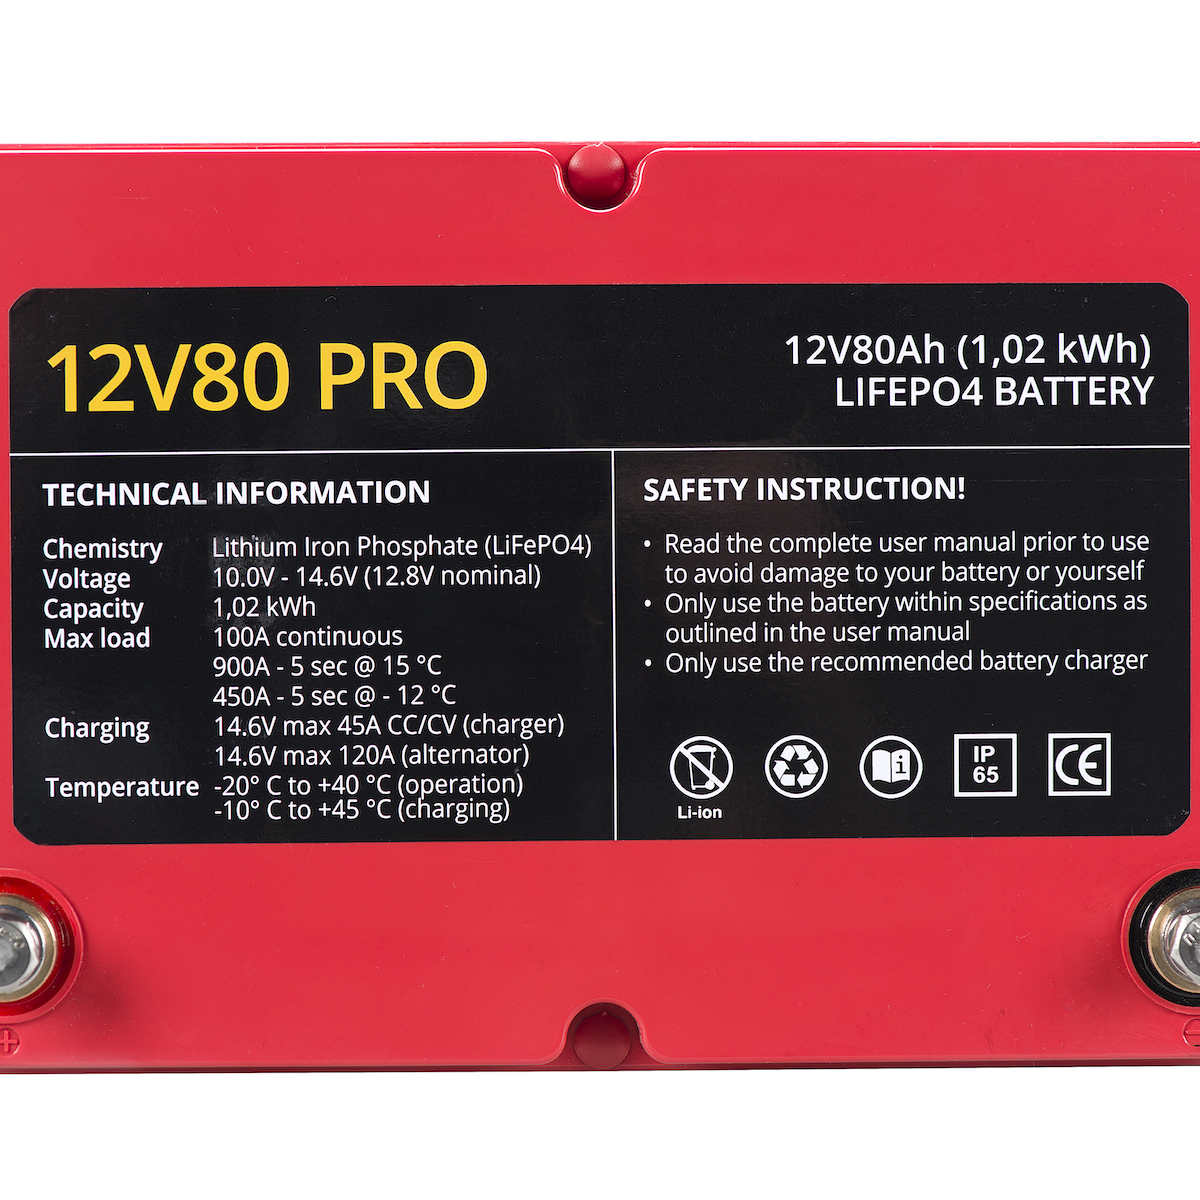 Rebelcell 12V80 PRO LifePo4 battery product image